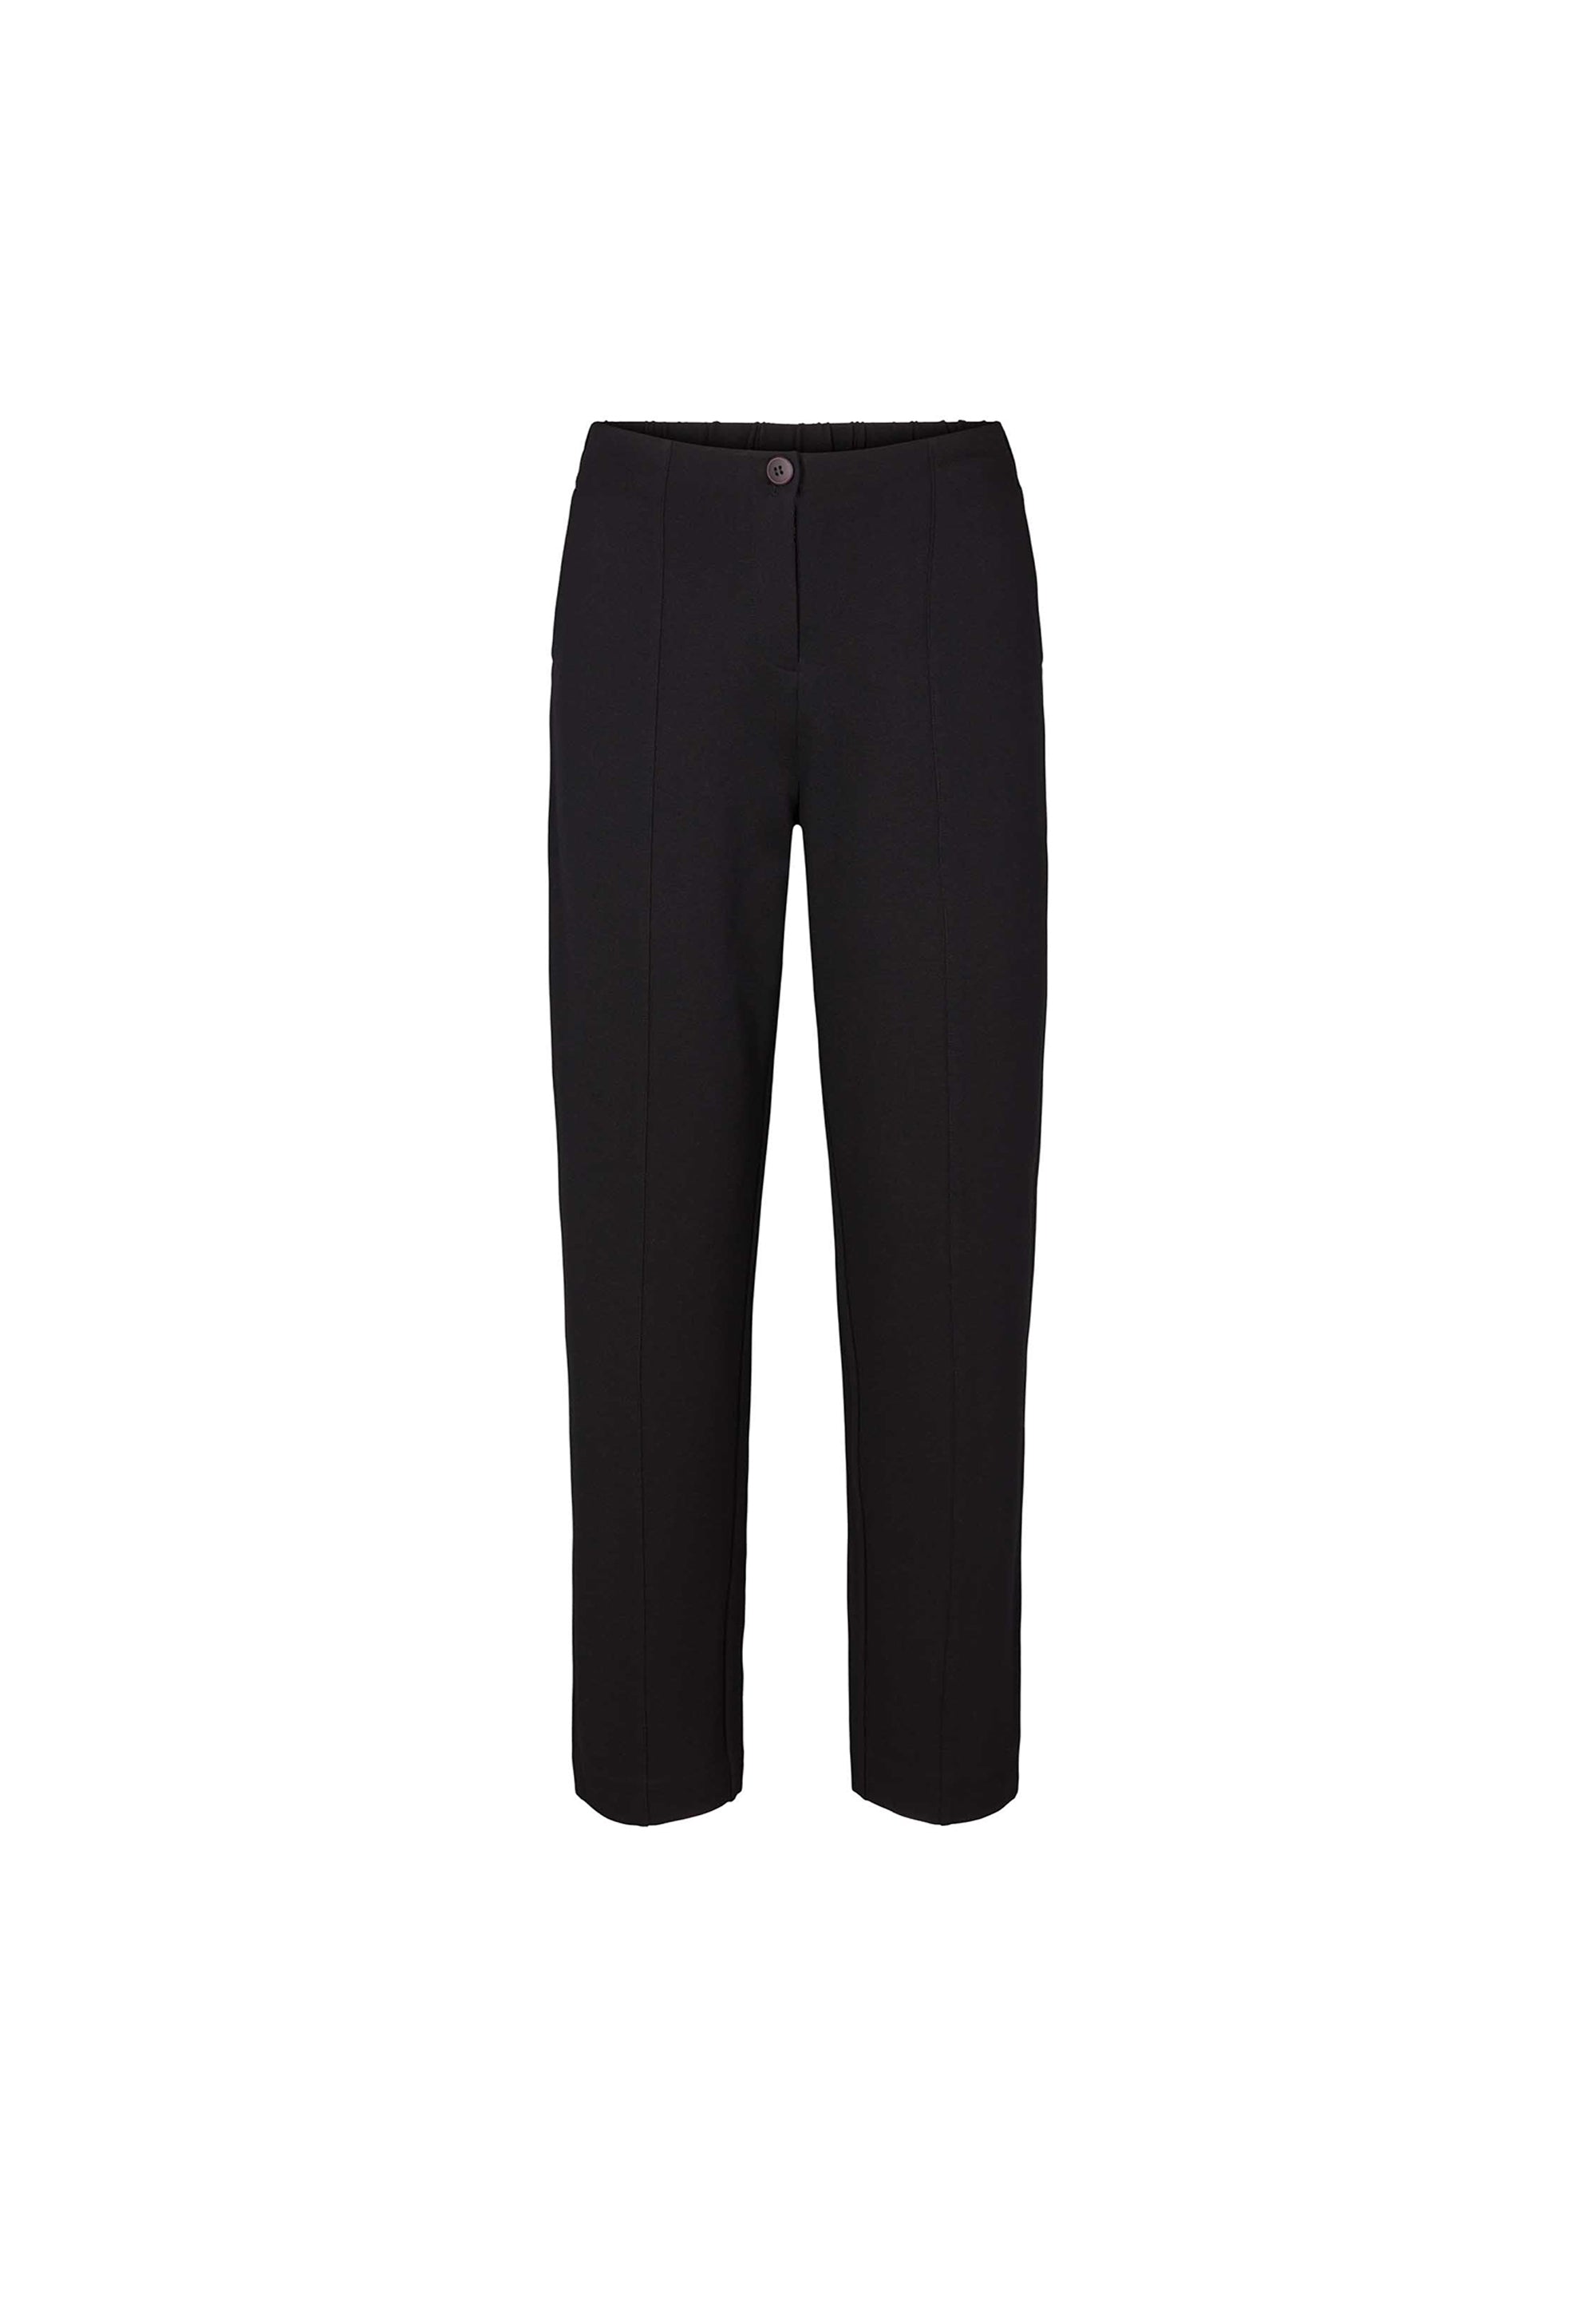 LAURIE Diana Relaxed - Medium Length Trousers RELAXED 99147 Black